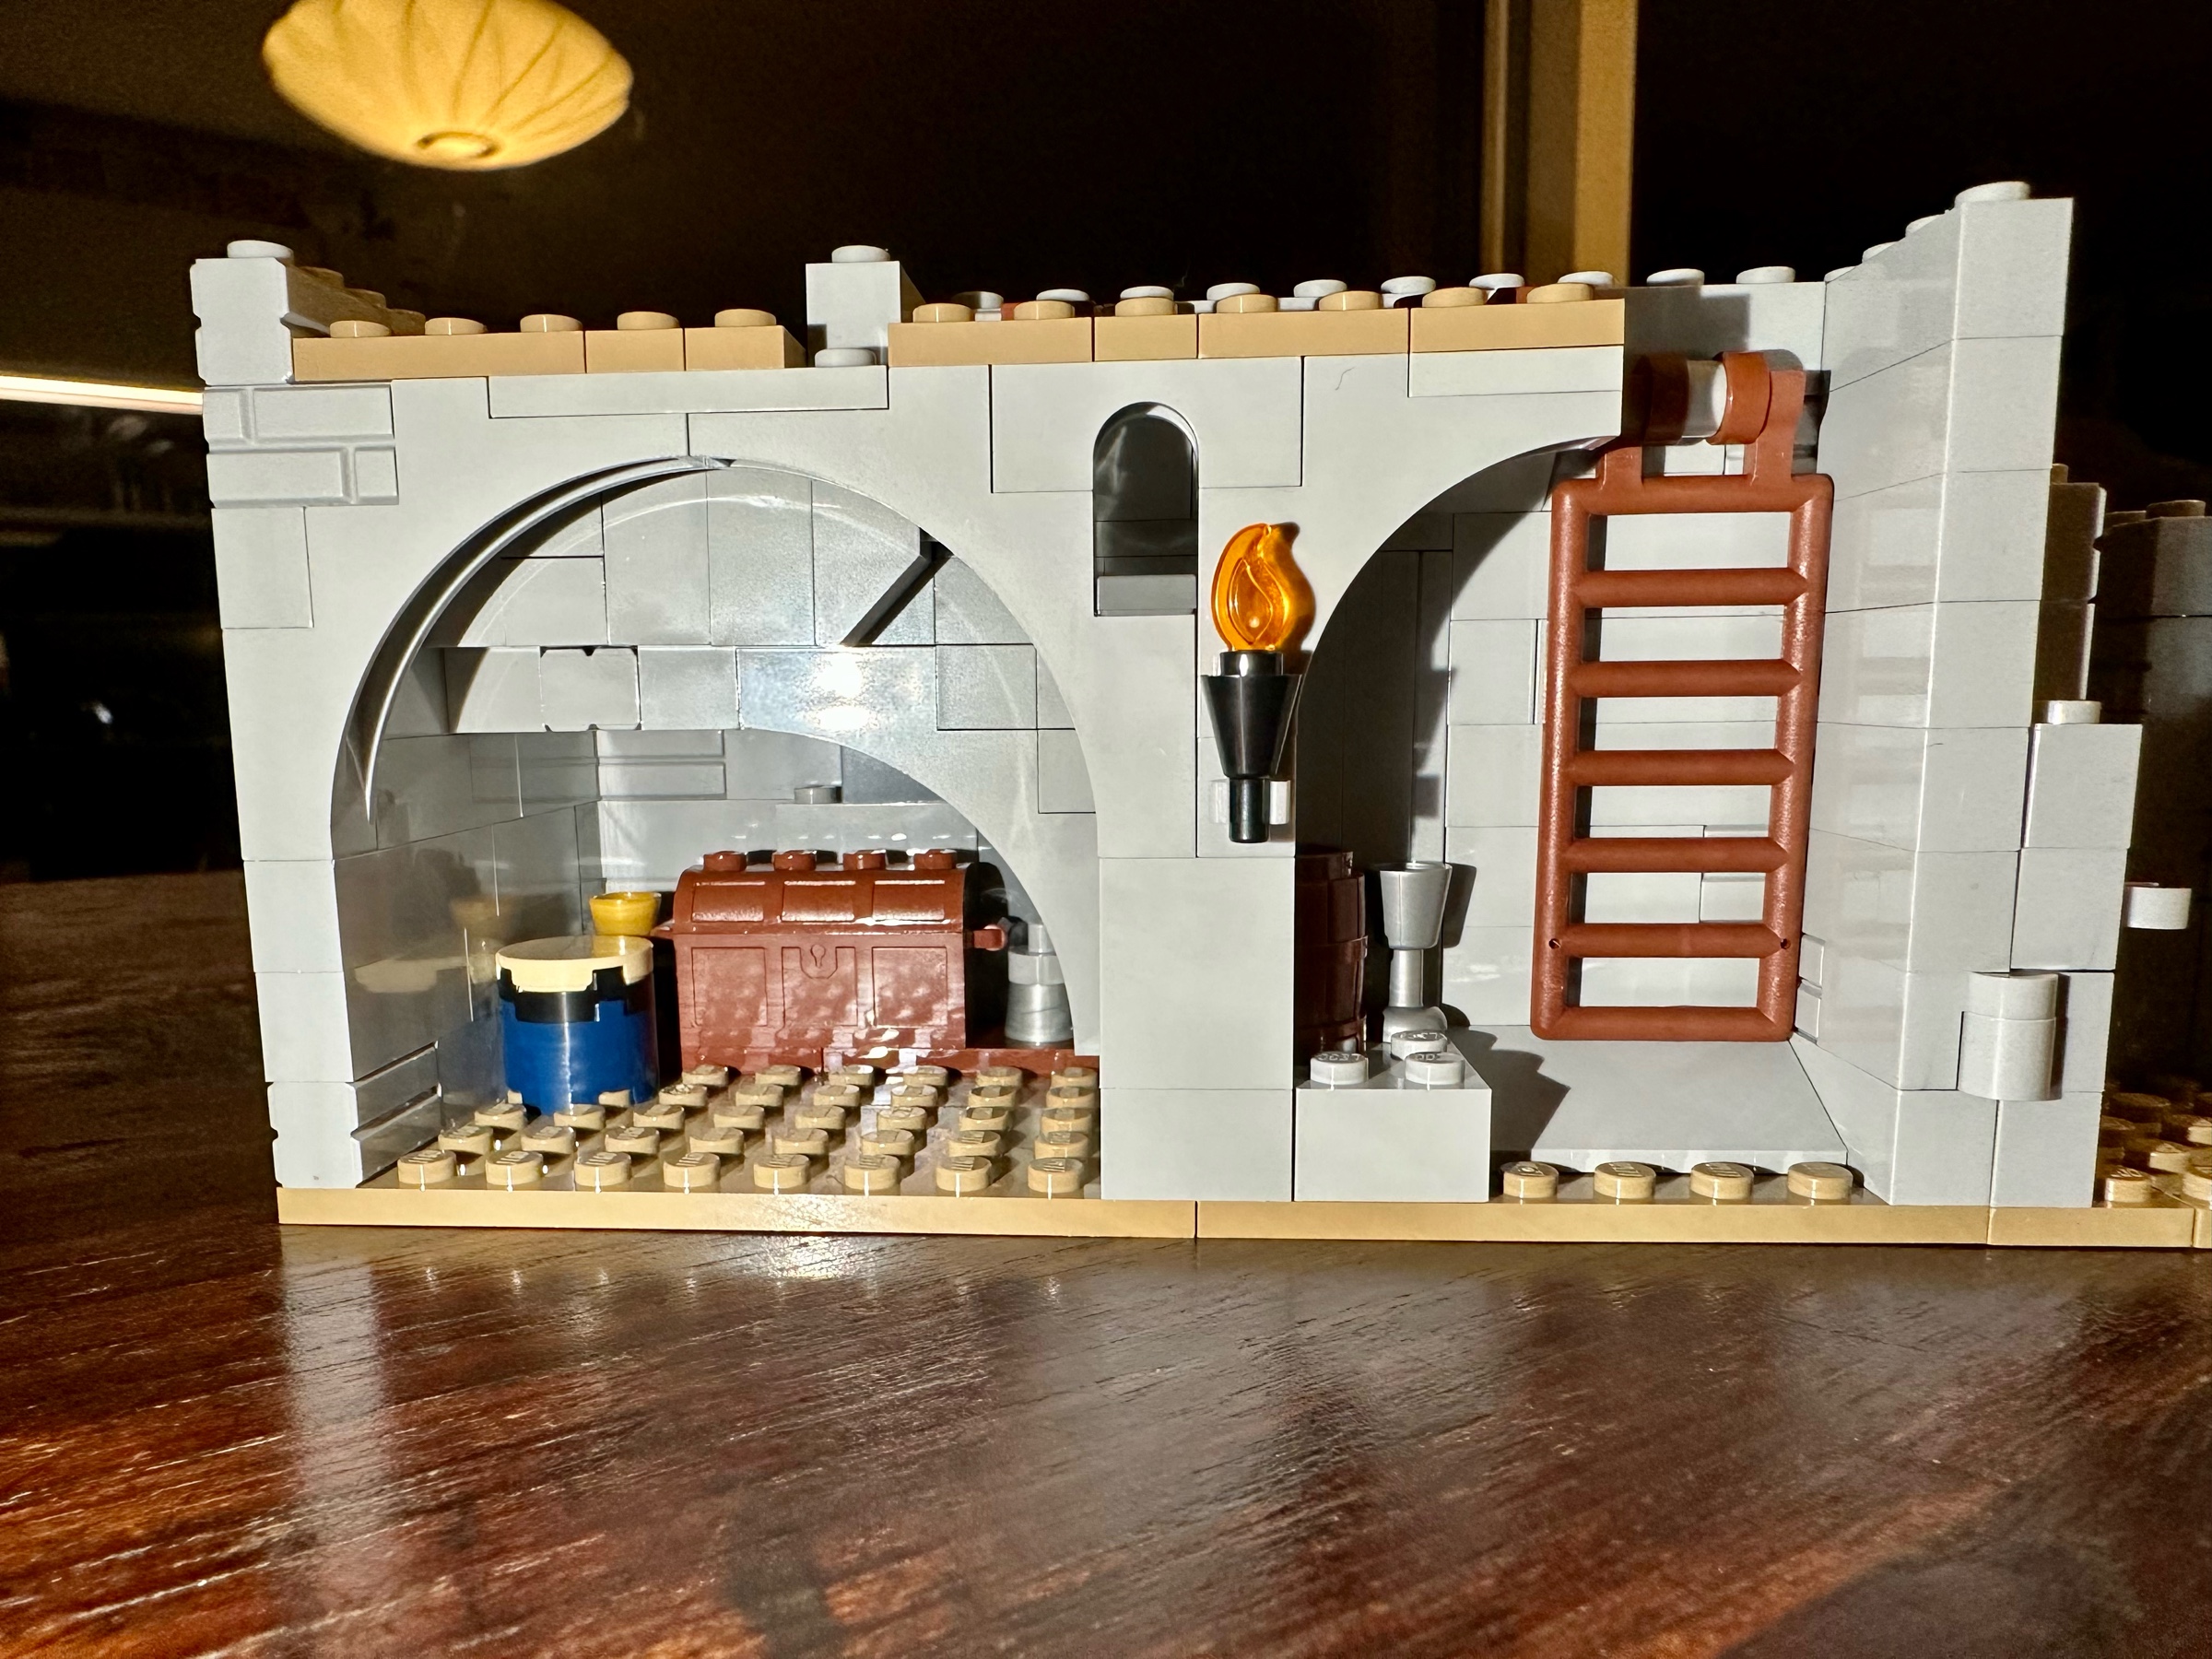 A LEGO dungeon. A treasure vault holding a chest, a goblet, a drum, and a bell is on the left. A wooden ladder and a flaming torch are on the right.